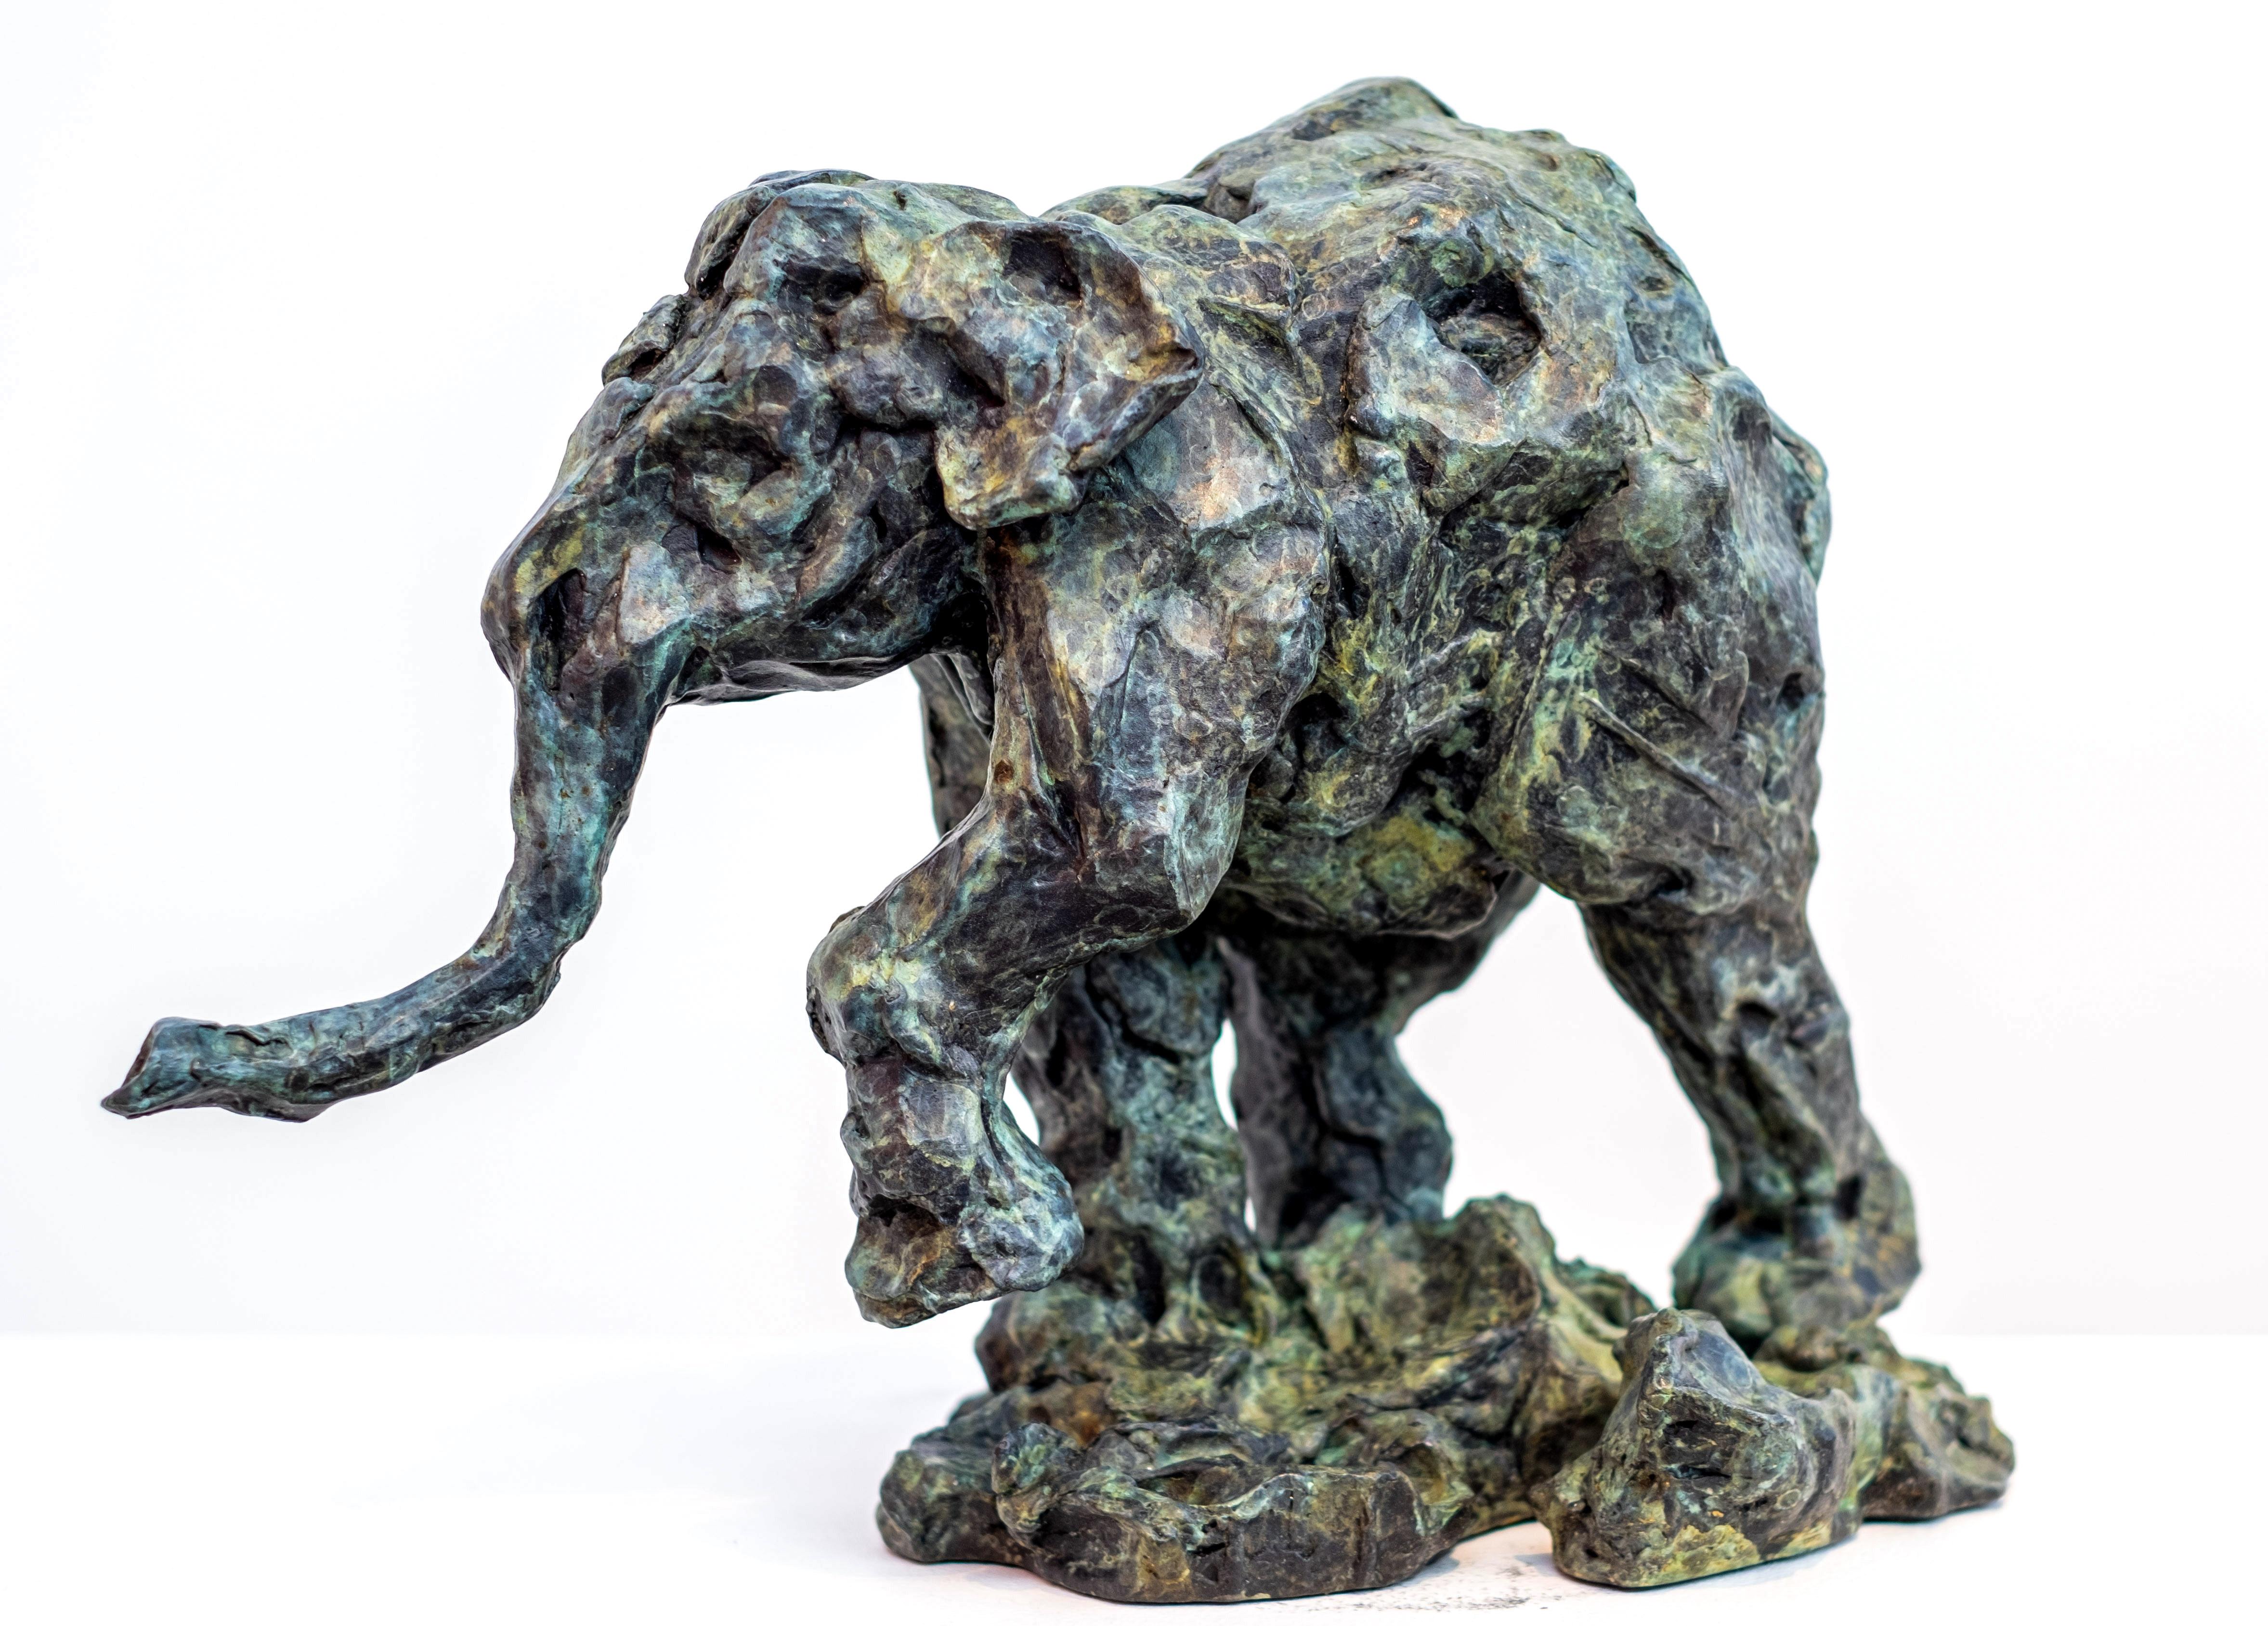 This delightful bronze sculpture of a walking baby elephant is highly textured and finished with an elegant sepia patina. Canadian sculptor Richard Tosczak begins his pieces with rapid pen and ink studies that evolve into dynamic three-dimensional